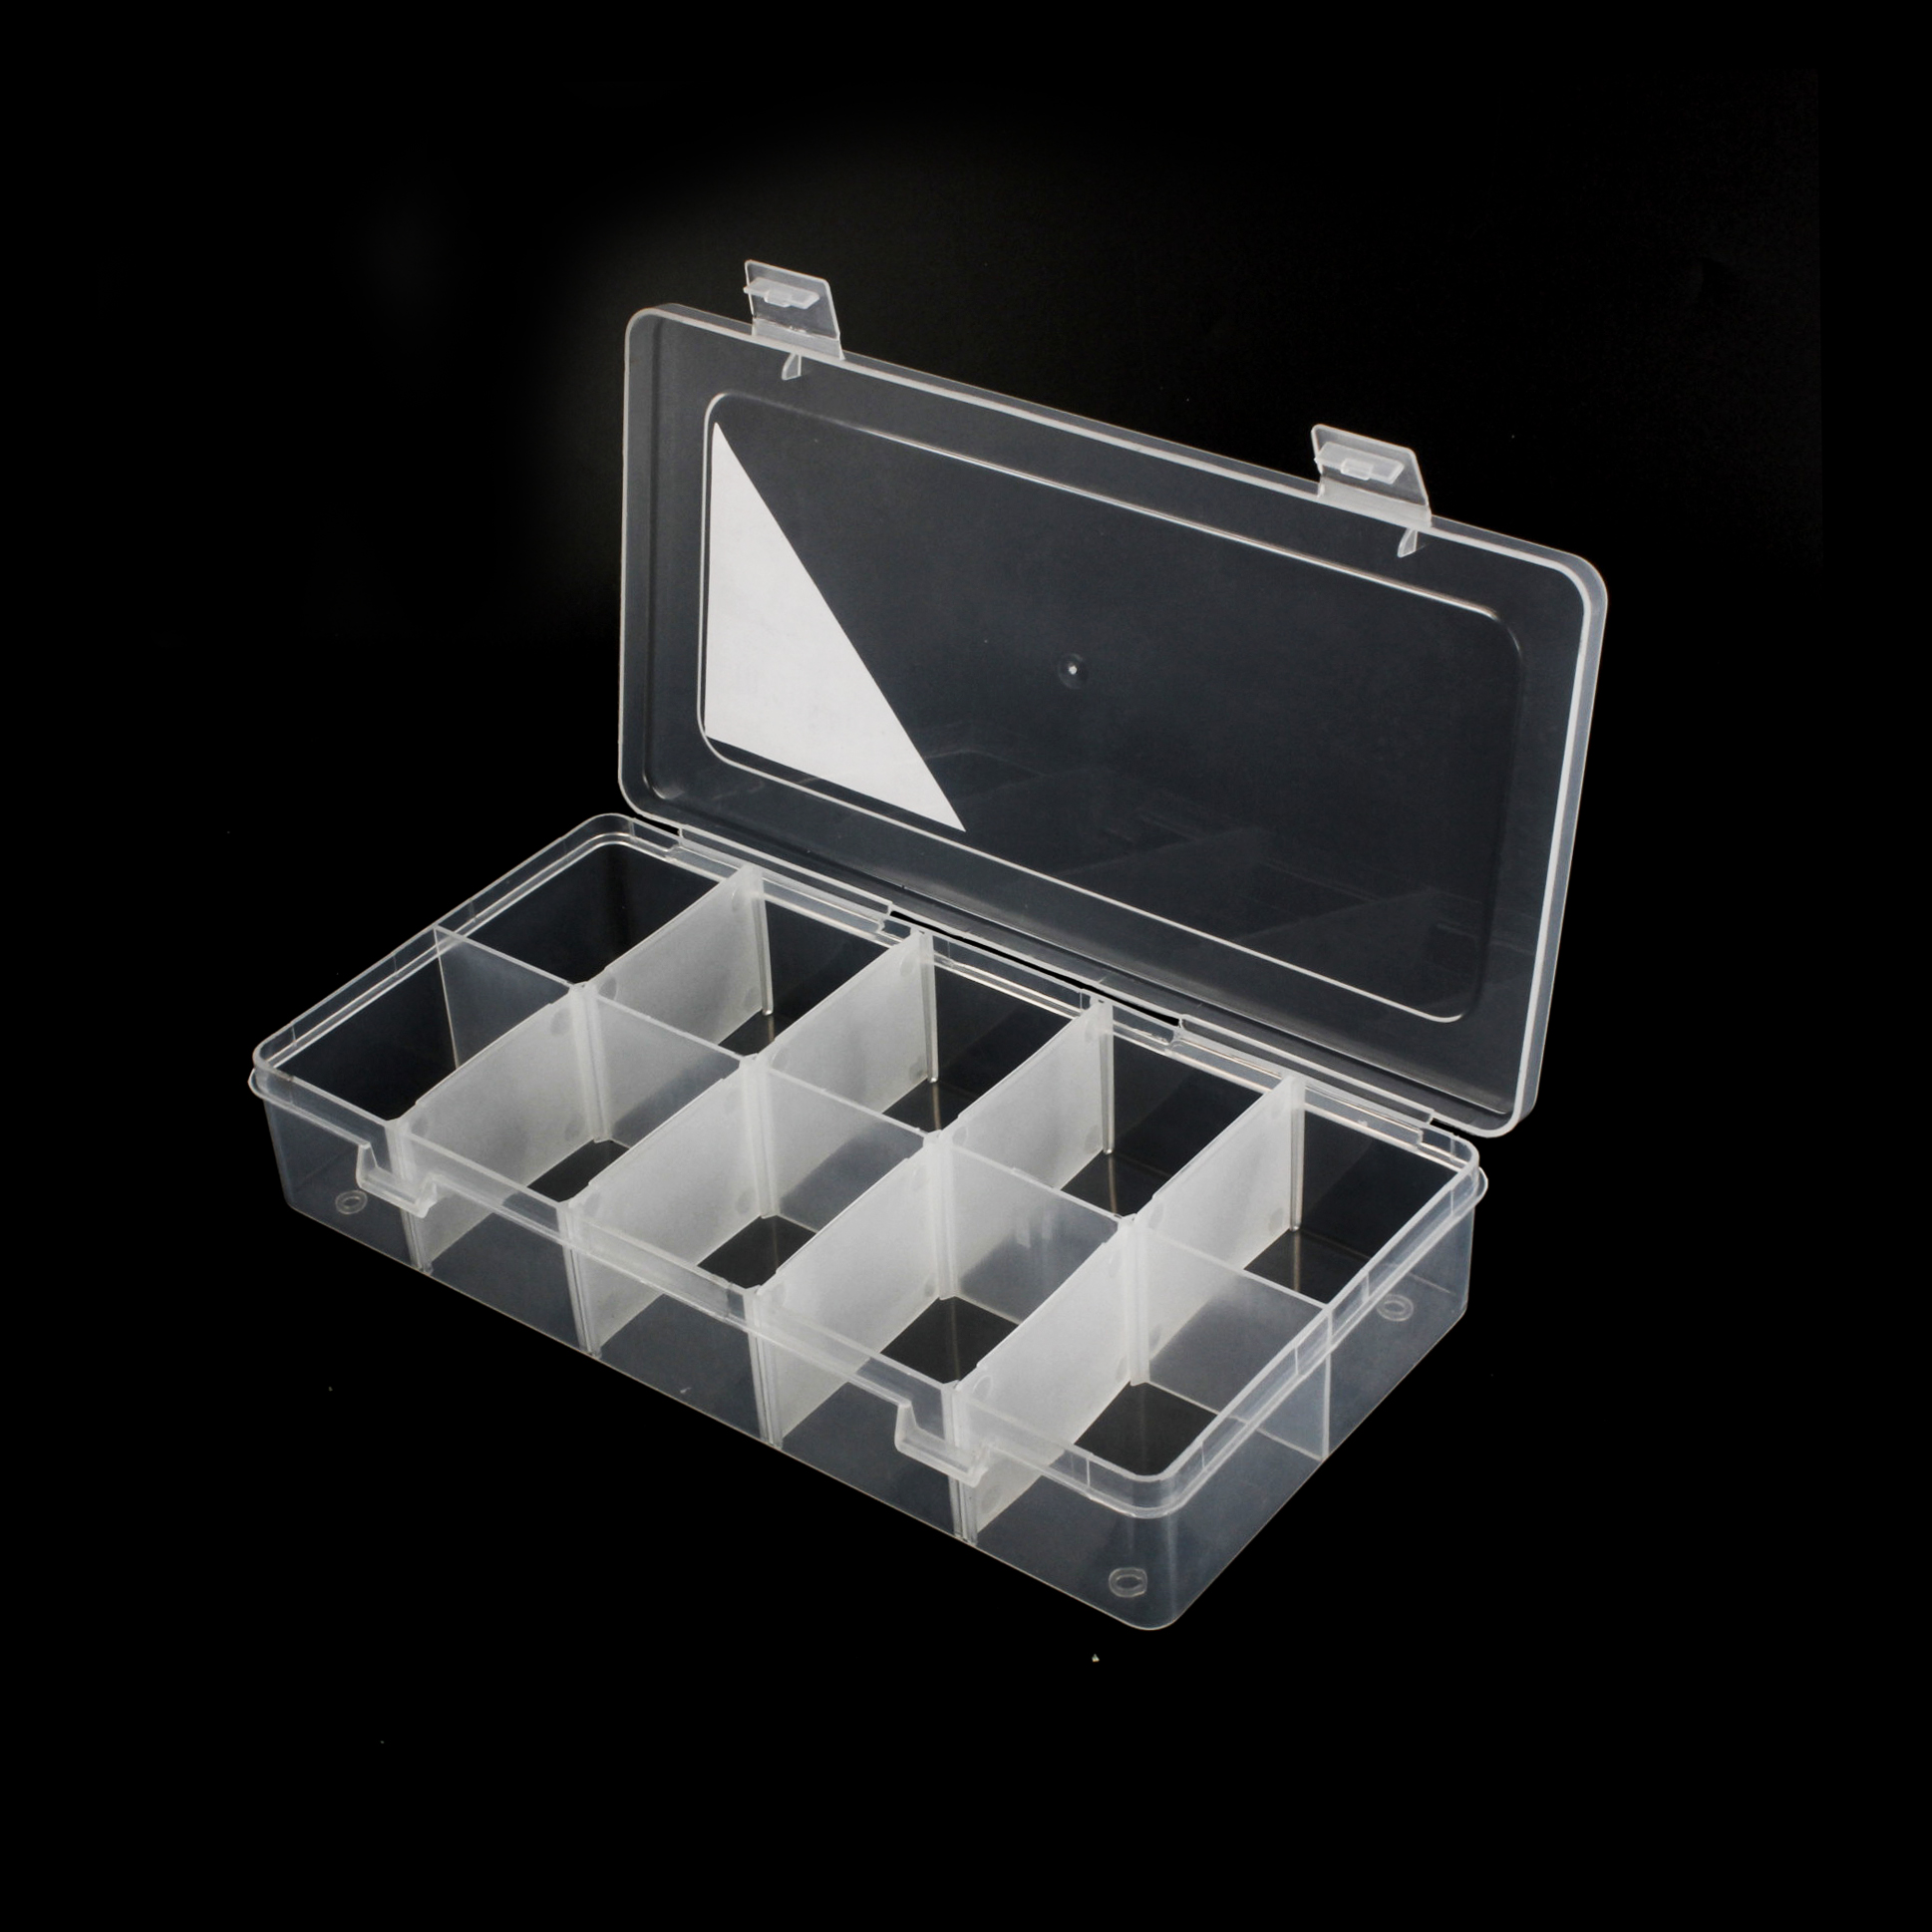 21971 customized new PP clear plastic storage boxes with lids 